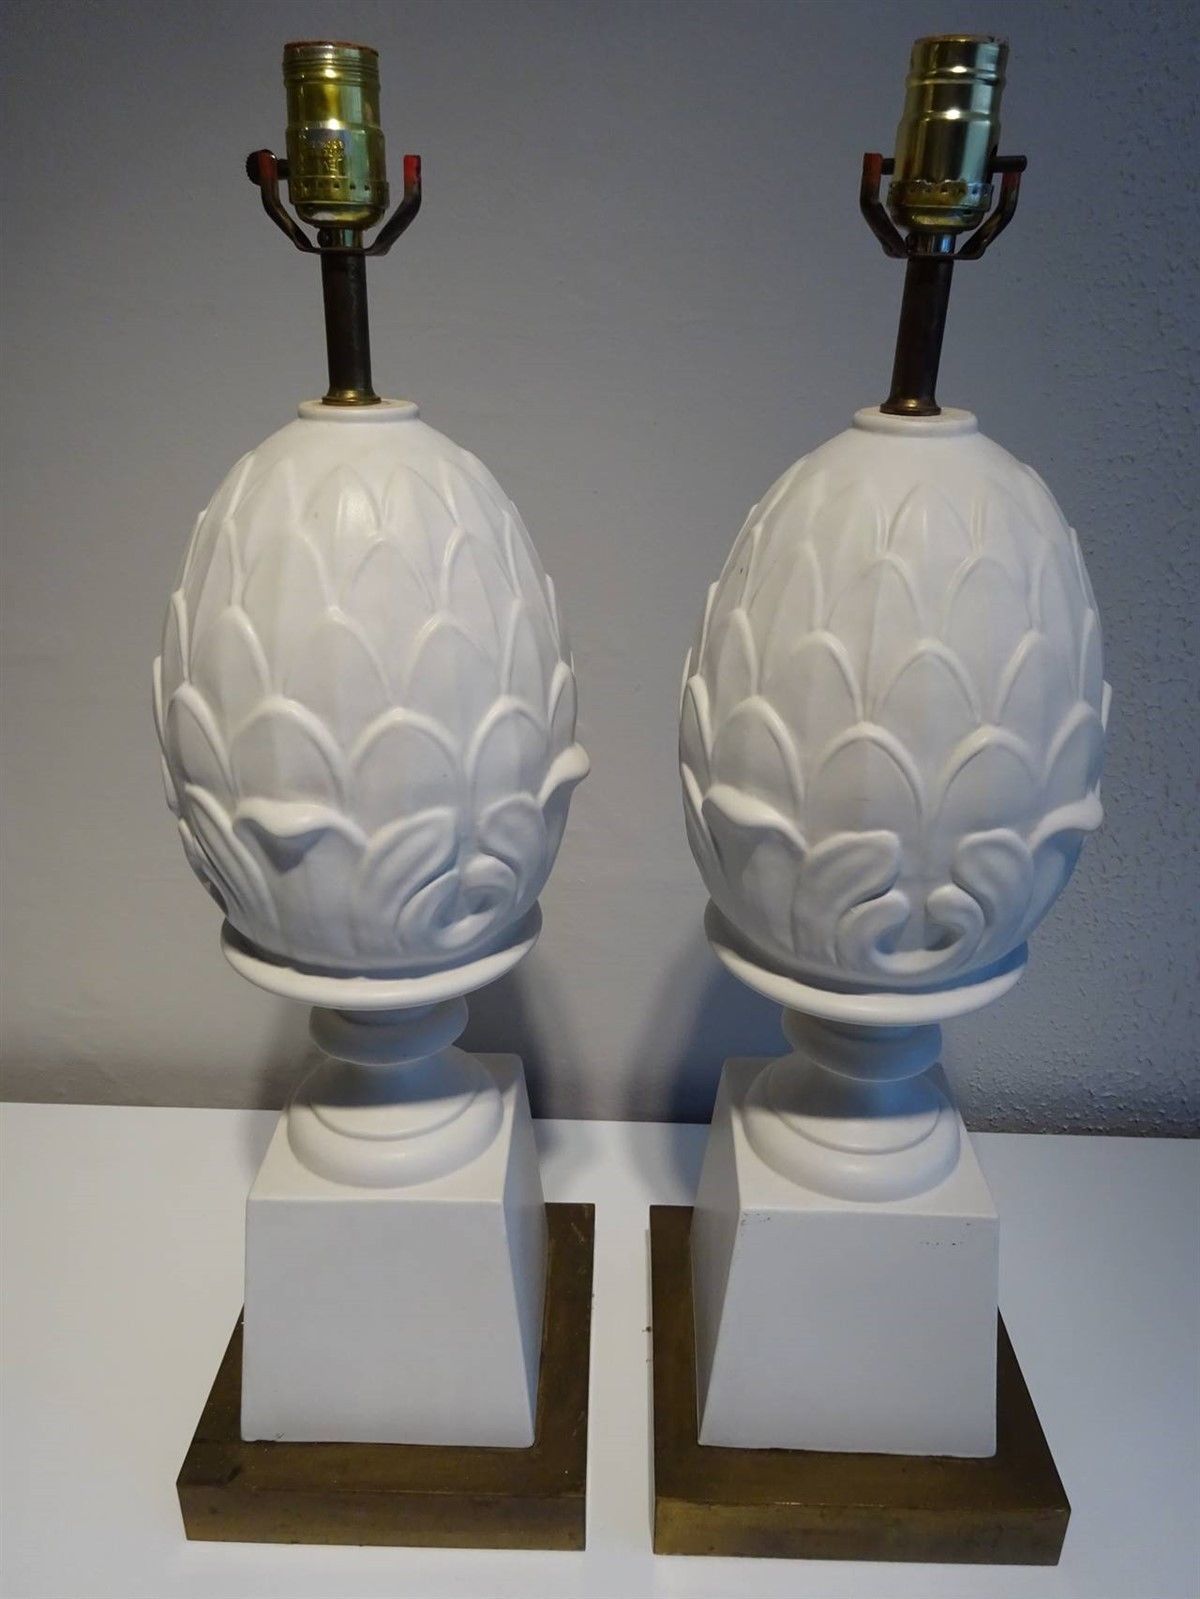 A Fabulous Pair of Ceramic Blanc de Chine Artichoke Table Lamps With Brass Bases.Height: 24 Inches Width: 7.5 Inches Depth: 7.5 Inches